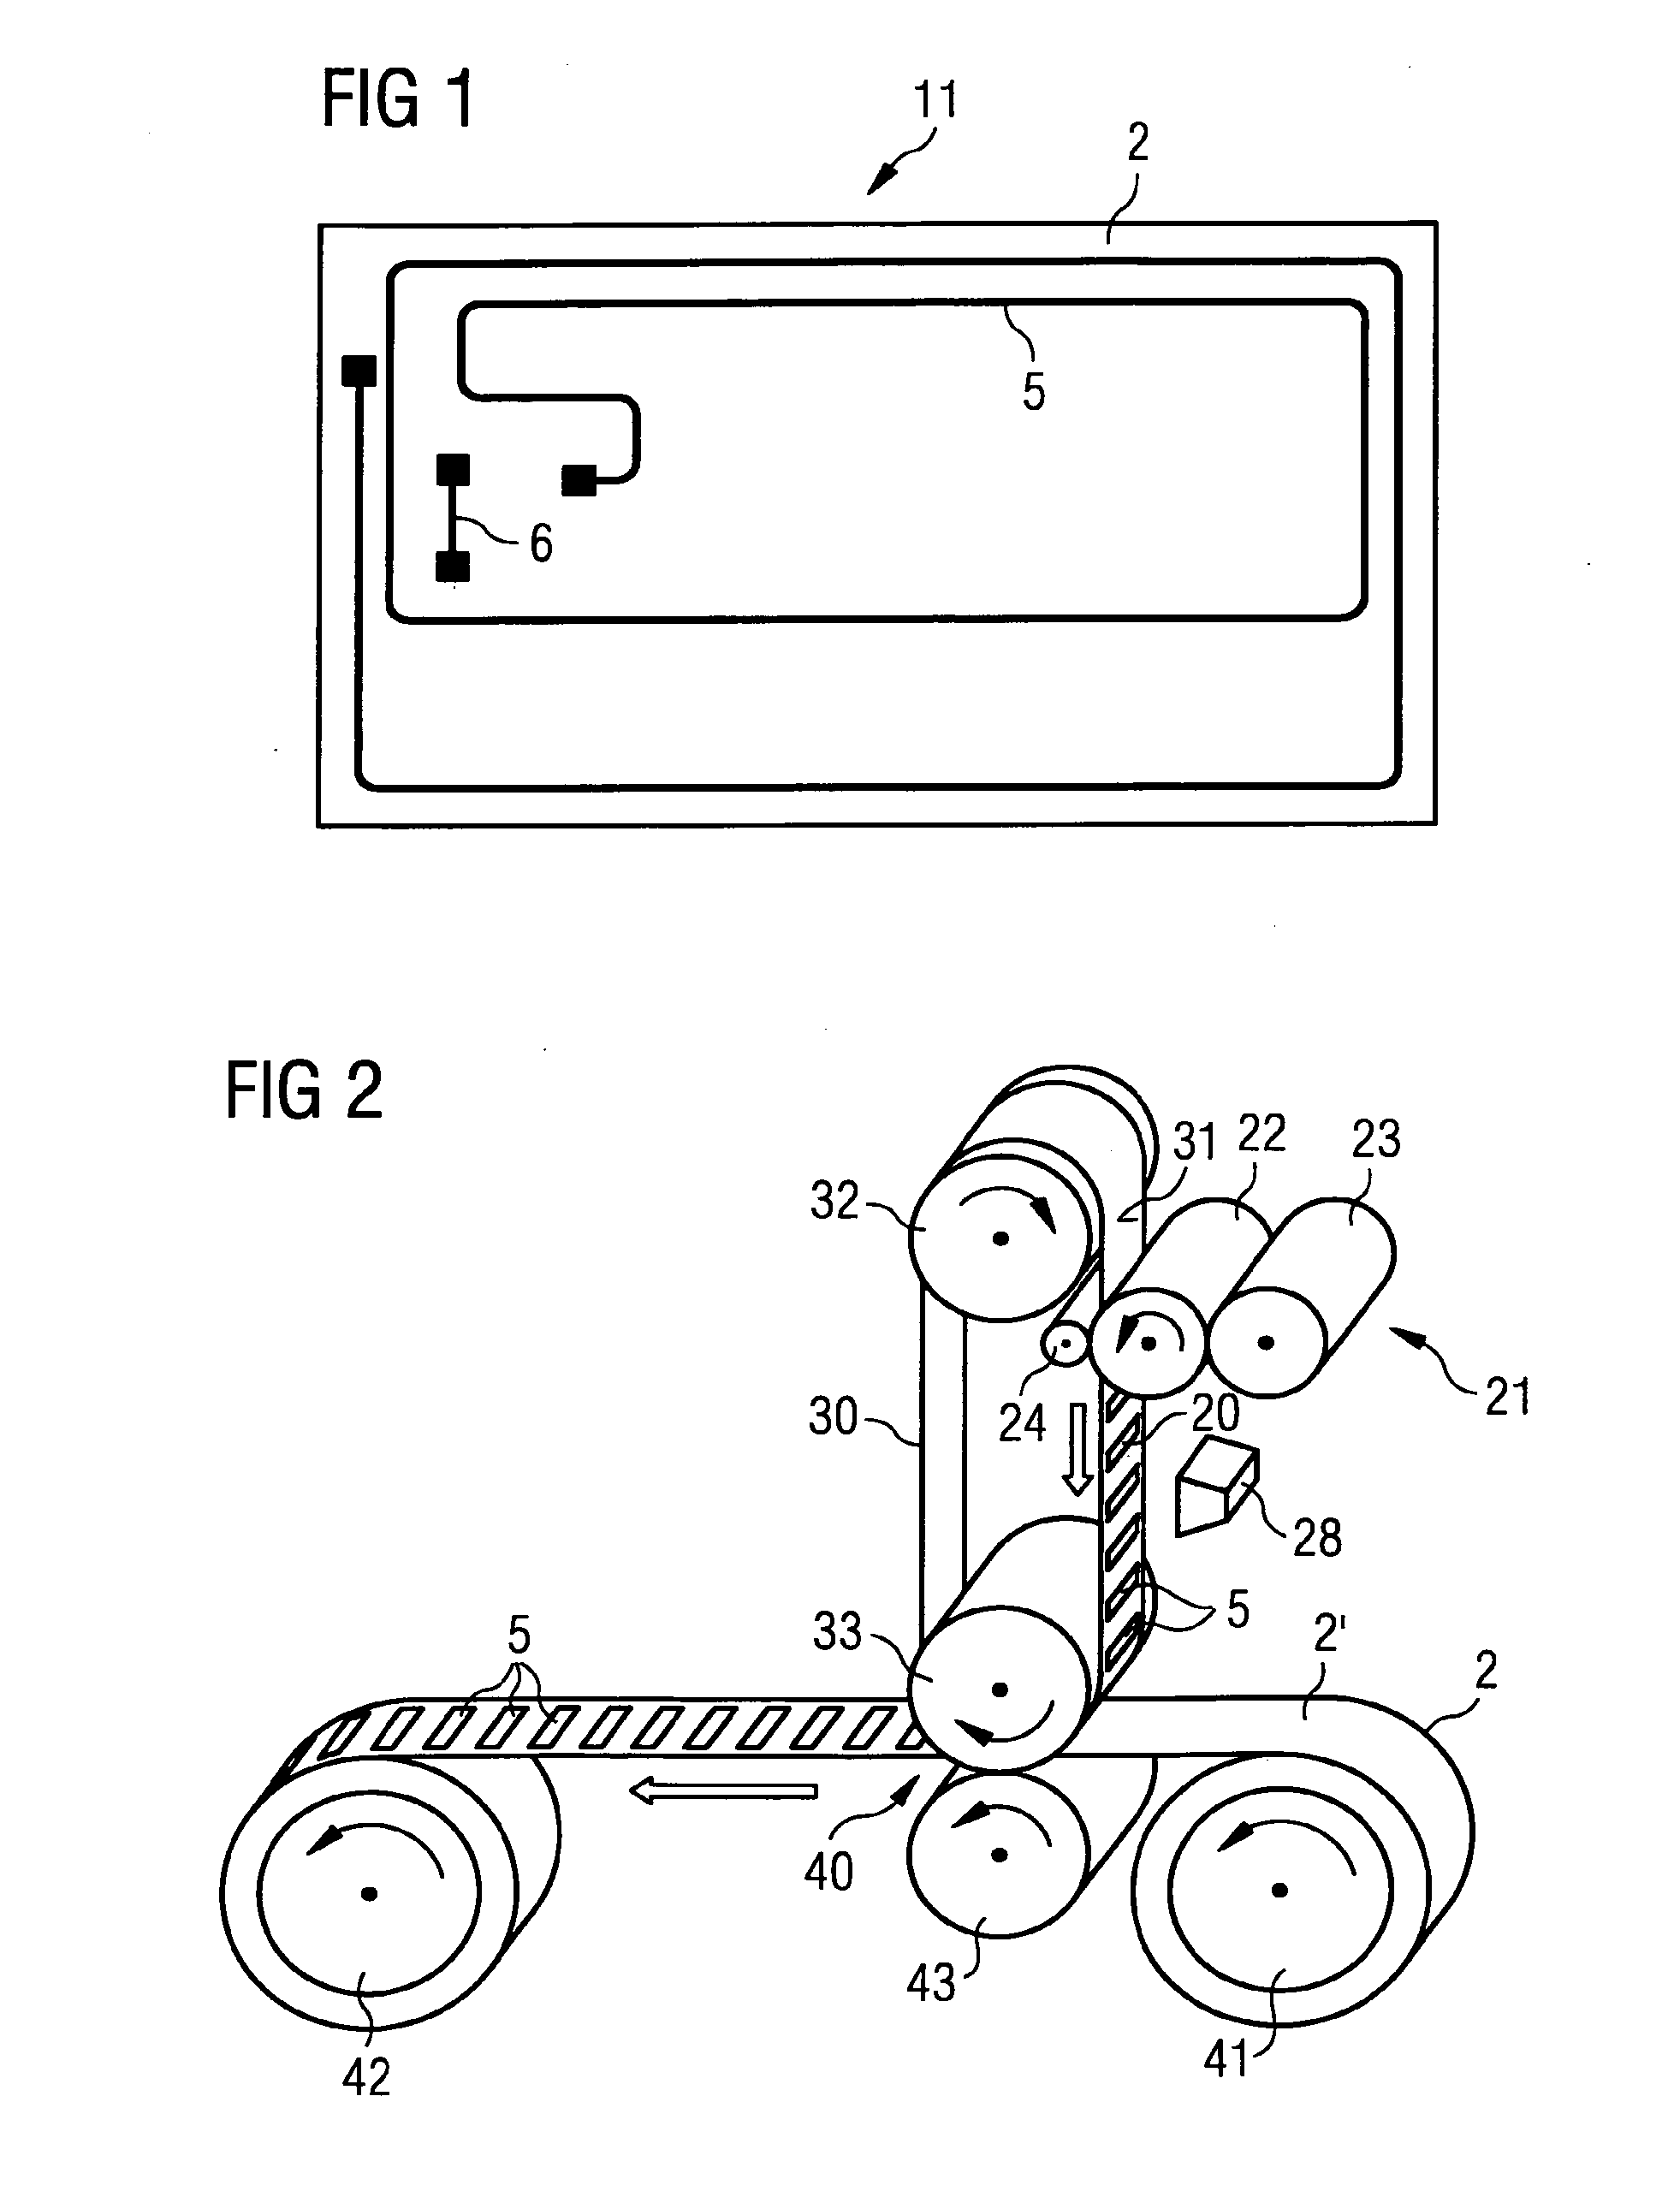 Transfer method for manufacturing conductor structures by means of nano-inks